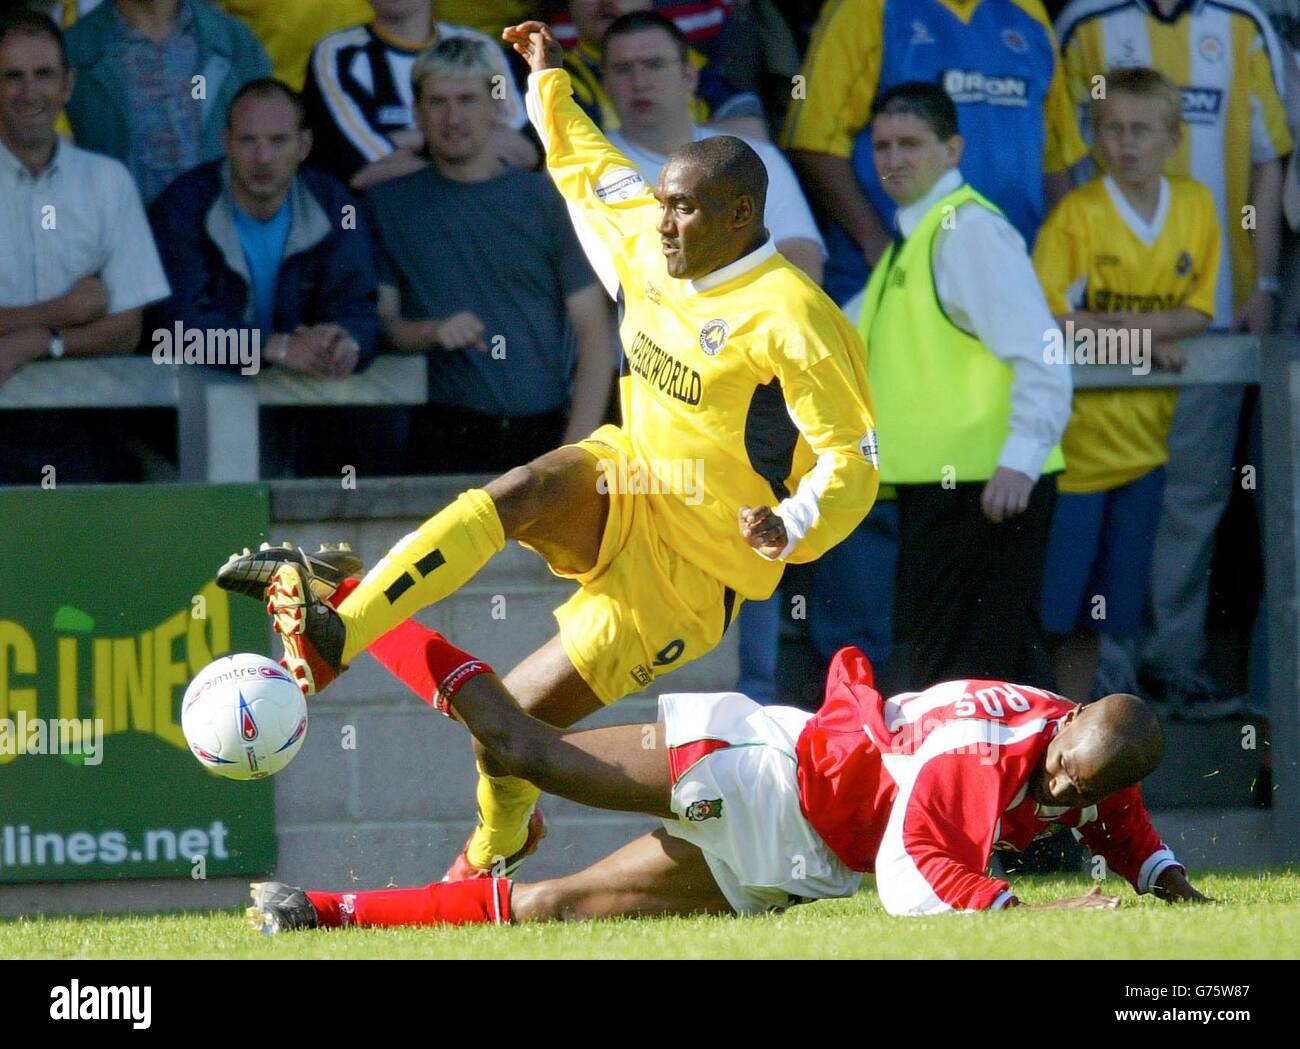 Torquay's Tony Bedeau is brought down by Wrexham's Paul Edwards to give Torquay a penalty during the Nationwide Division Three game at Plainmoor ground, Torquay. NO UNOFFICIAL CLUB WEBSITE USE. Stock Photo